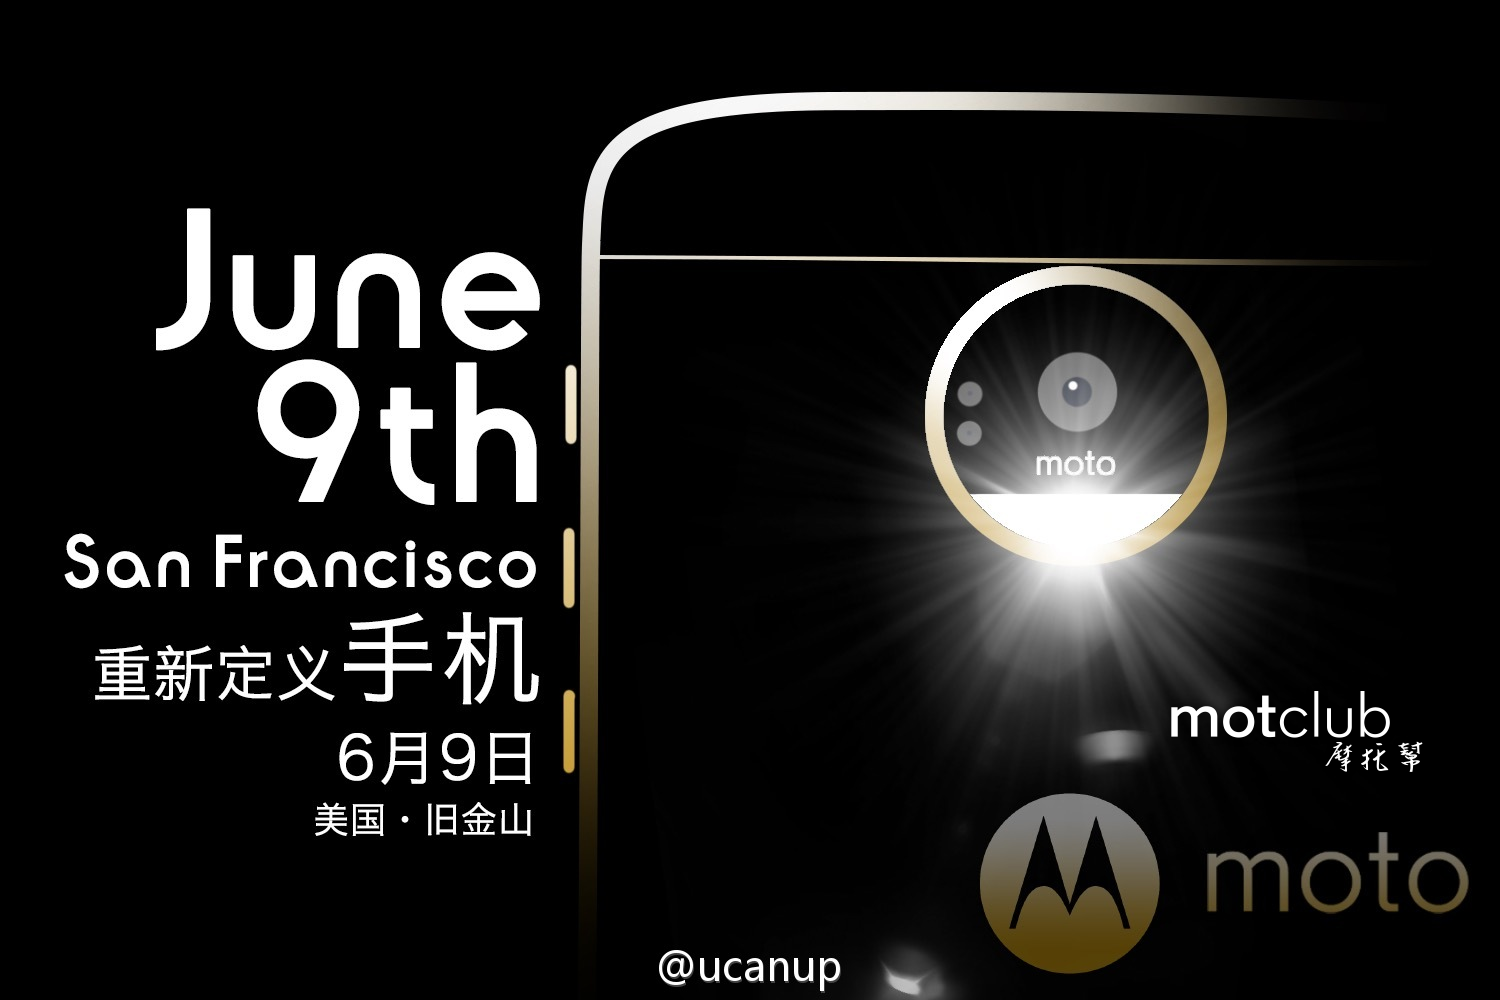 lenovo trademarks moto z modular phone ahead of possible 9 june event image 1